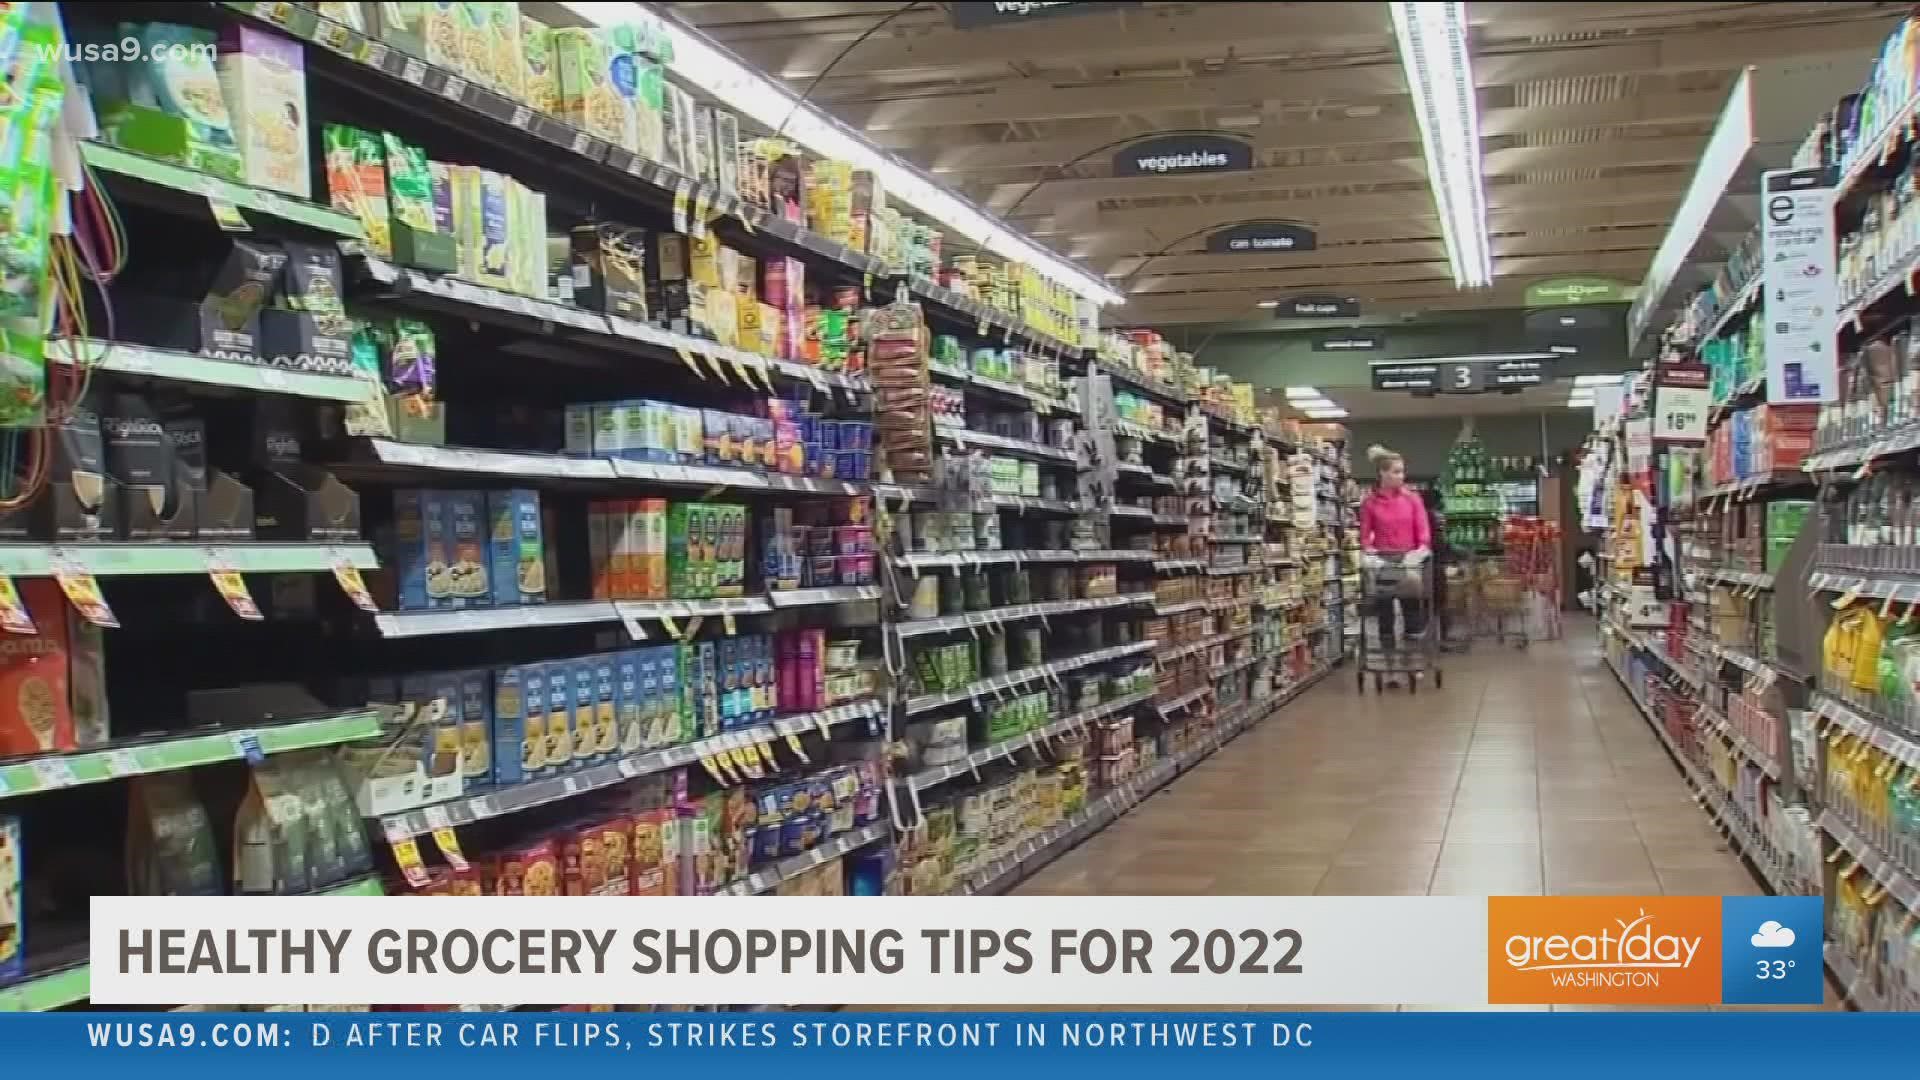 Vida Fitness nutritionist, Addie Claire Jones shares grocery shopping tips for a healthy 2022.